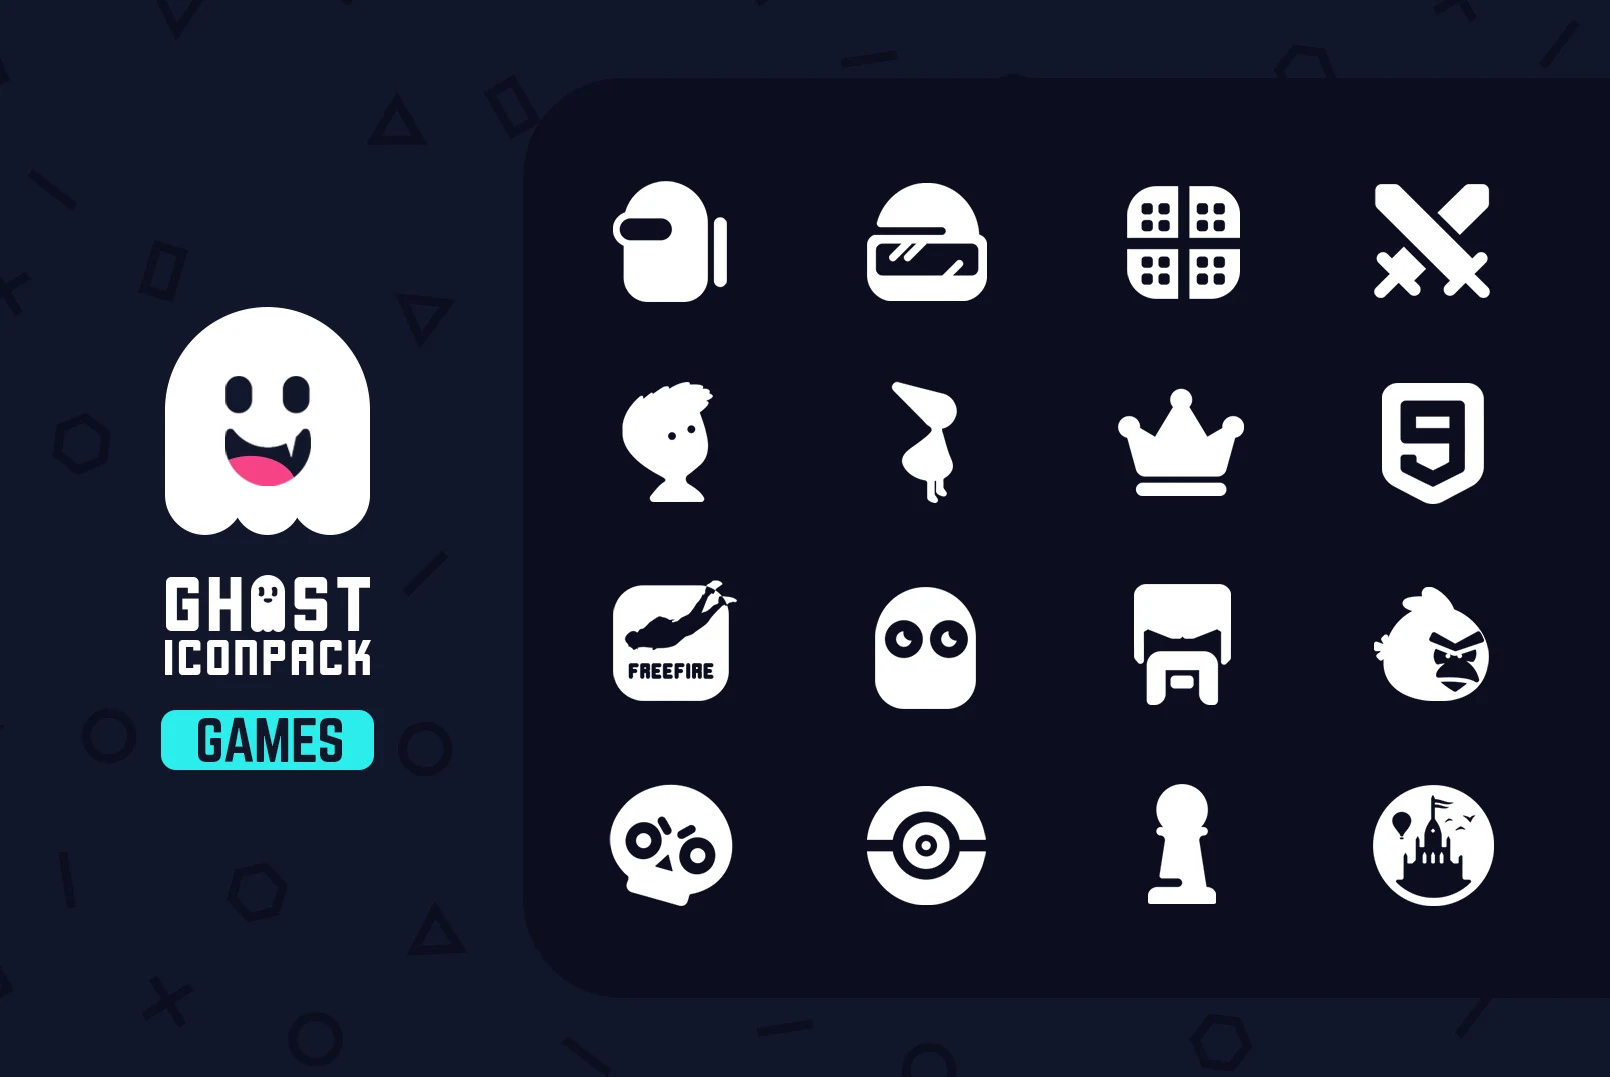 Ghost IconPack Mod Apk For Android